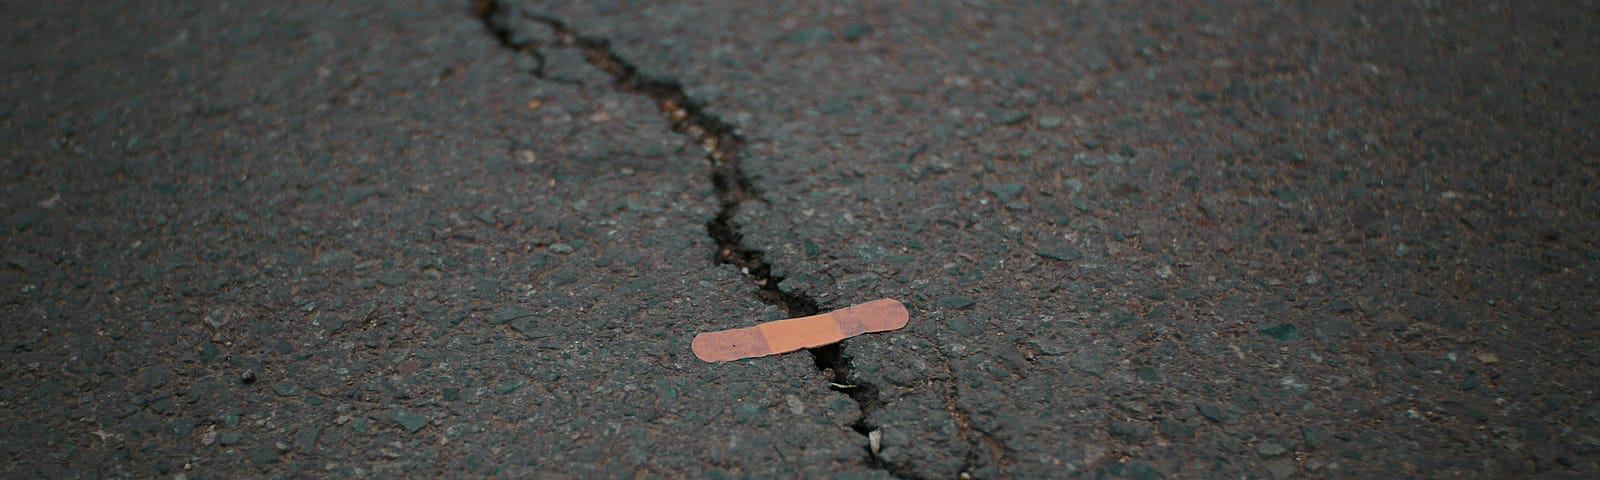 Plaster placed on a pavement crack